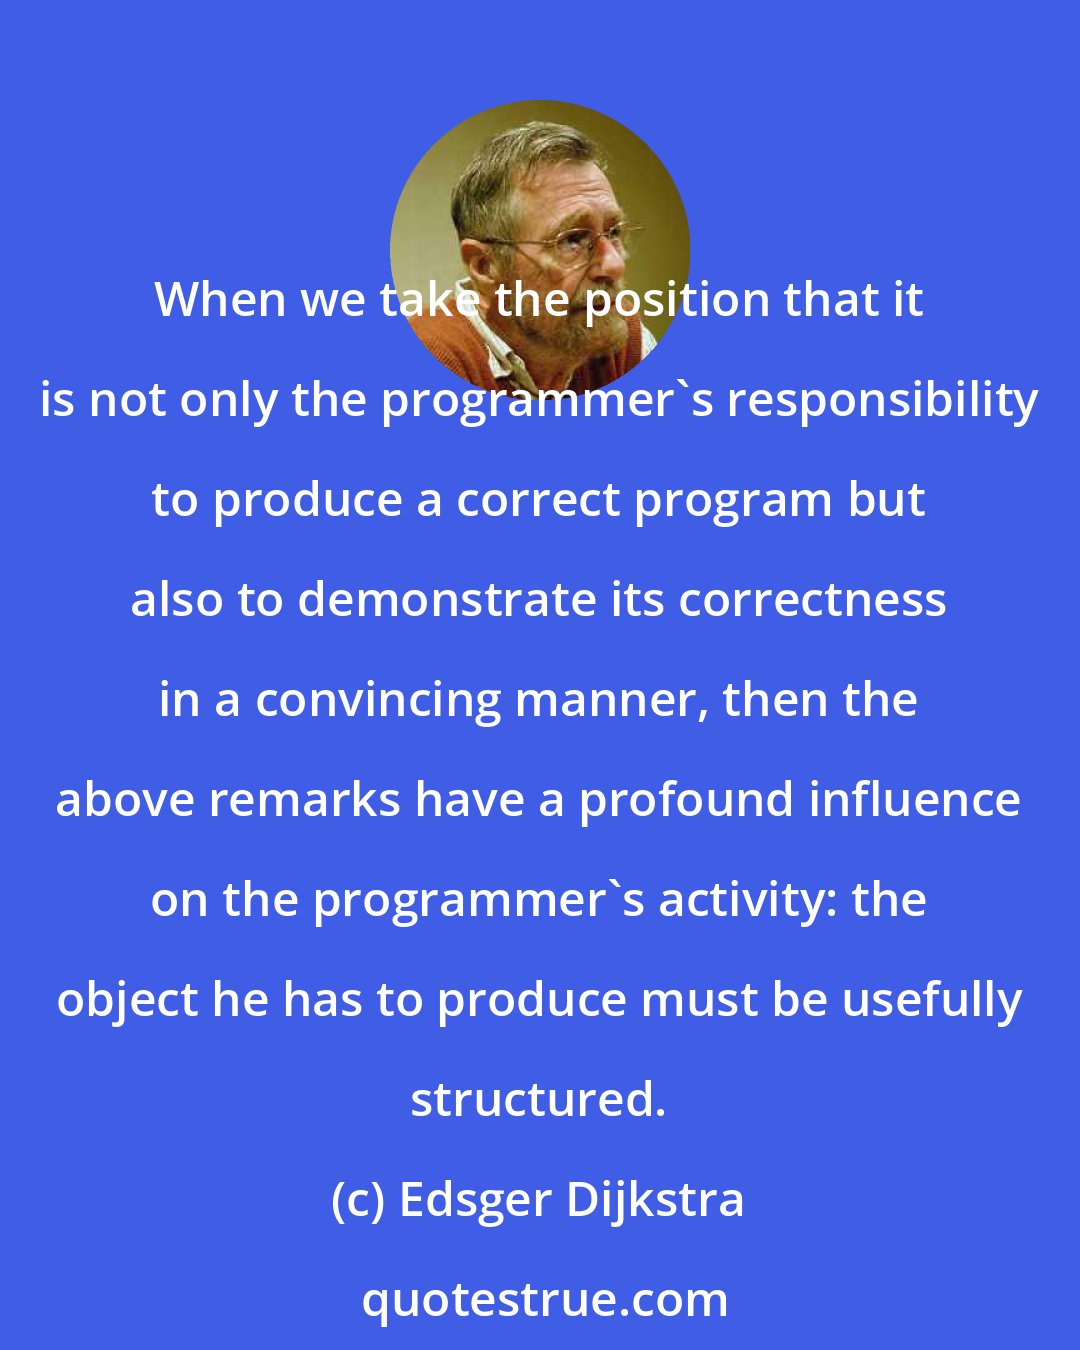 Edsger Dijkstra: When we take the position that it is not only the programmer's responsibility to produce a correct program but also to demonstrate its correctness in a convincing manner, then the above remarks have a profound influence on the programmer's activity: the object he has to produce must be usefully structured.